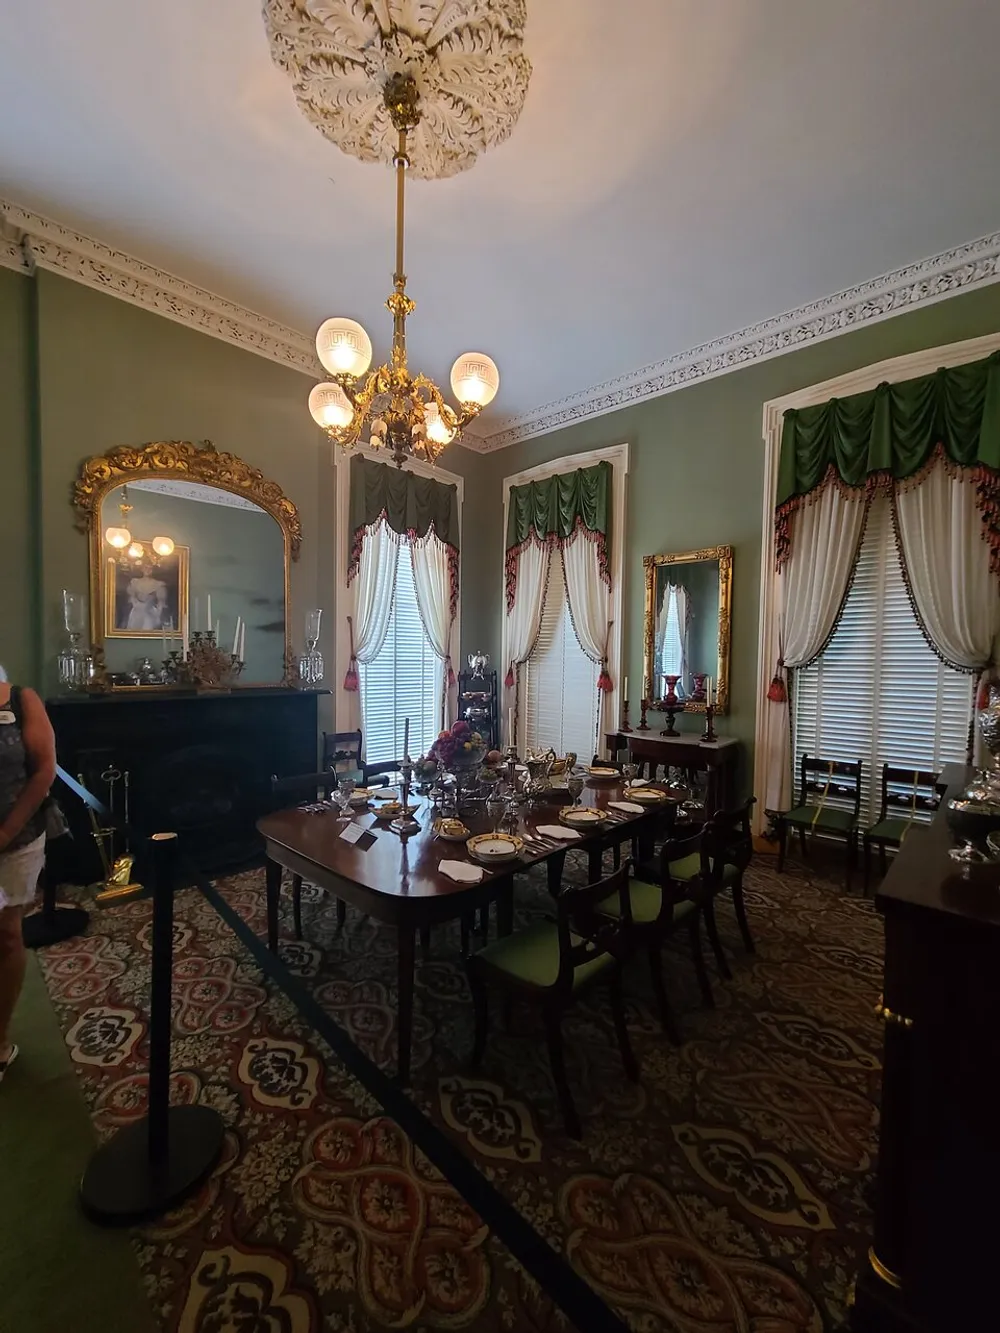 The image showcases an elegant Victorian-style dining room with a chandelier ornate ceiling rose patterned carpet a large mirror restored window draperies and a formally set dining table reflecting historical interior design